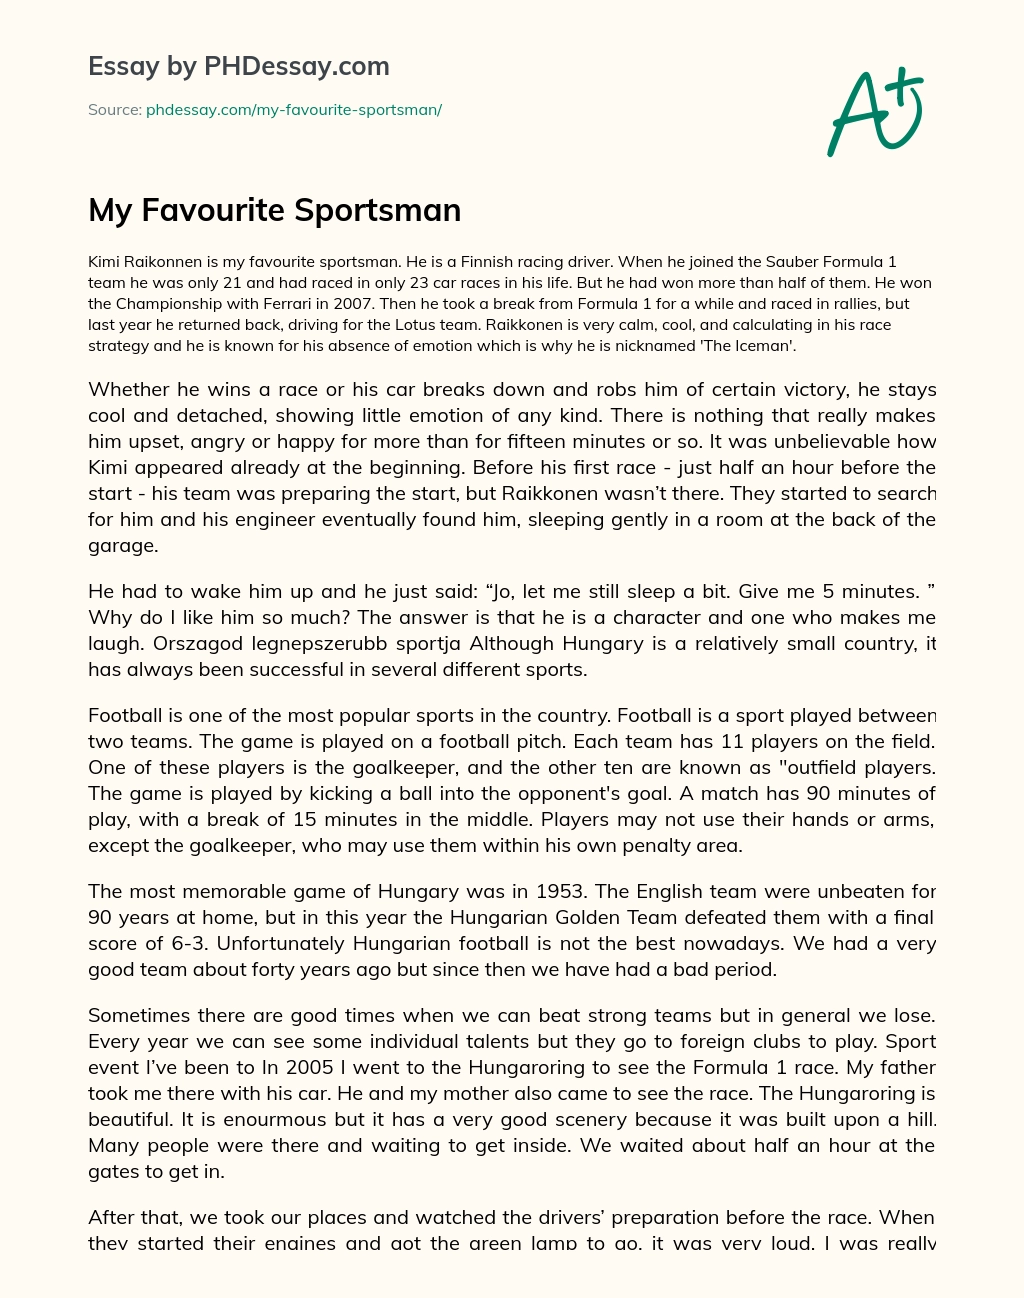 speech on favourite sports person